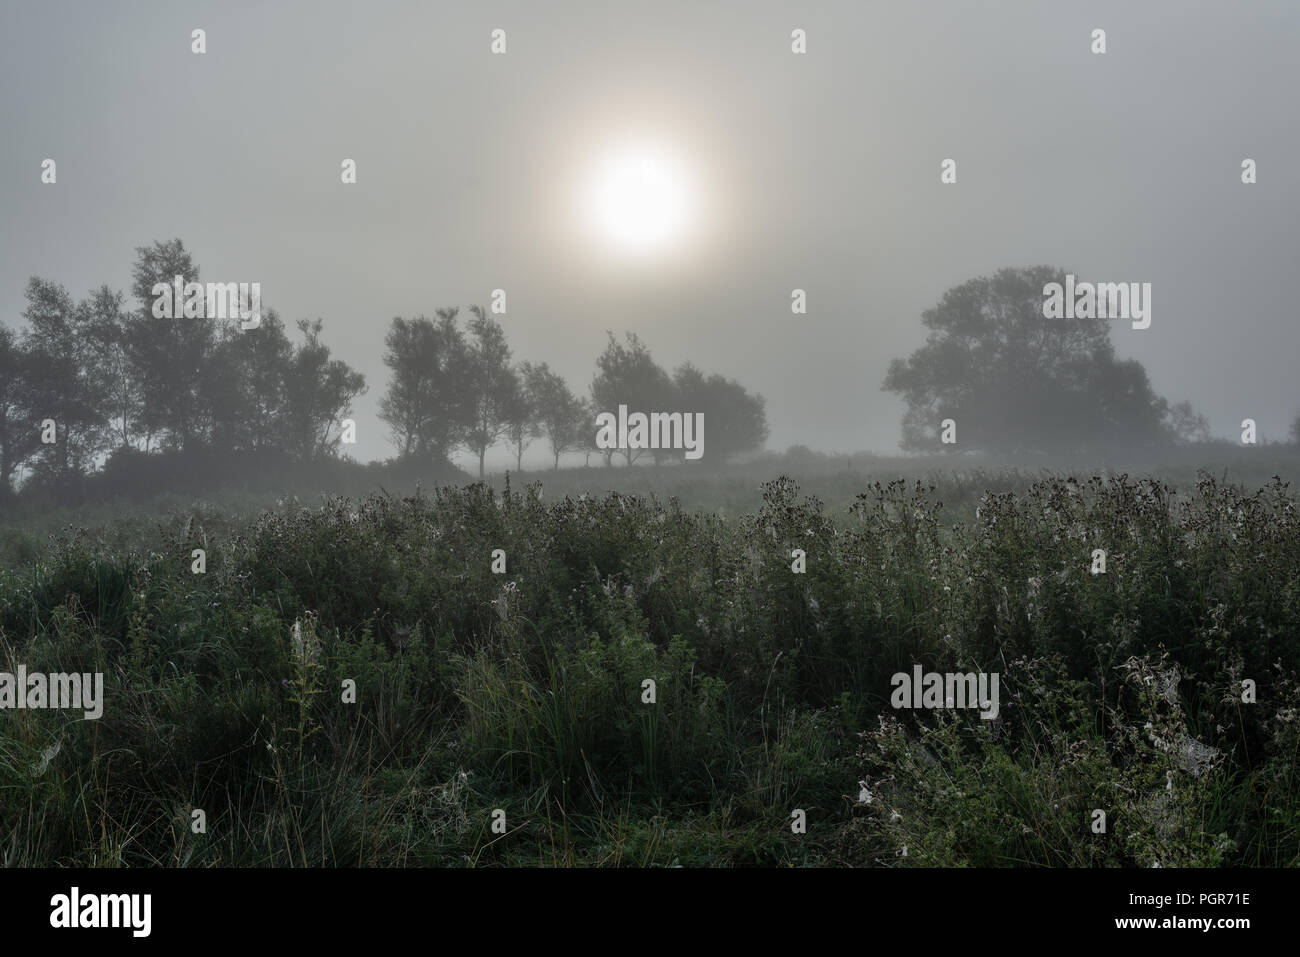 Tall weeds with white heads covered in dew with a line of trees behind on a misty autumnal morning. Stock Photo